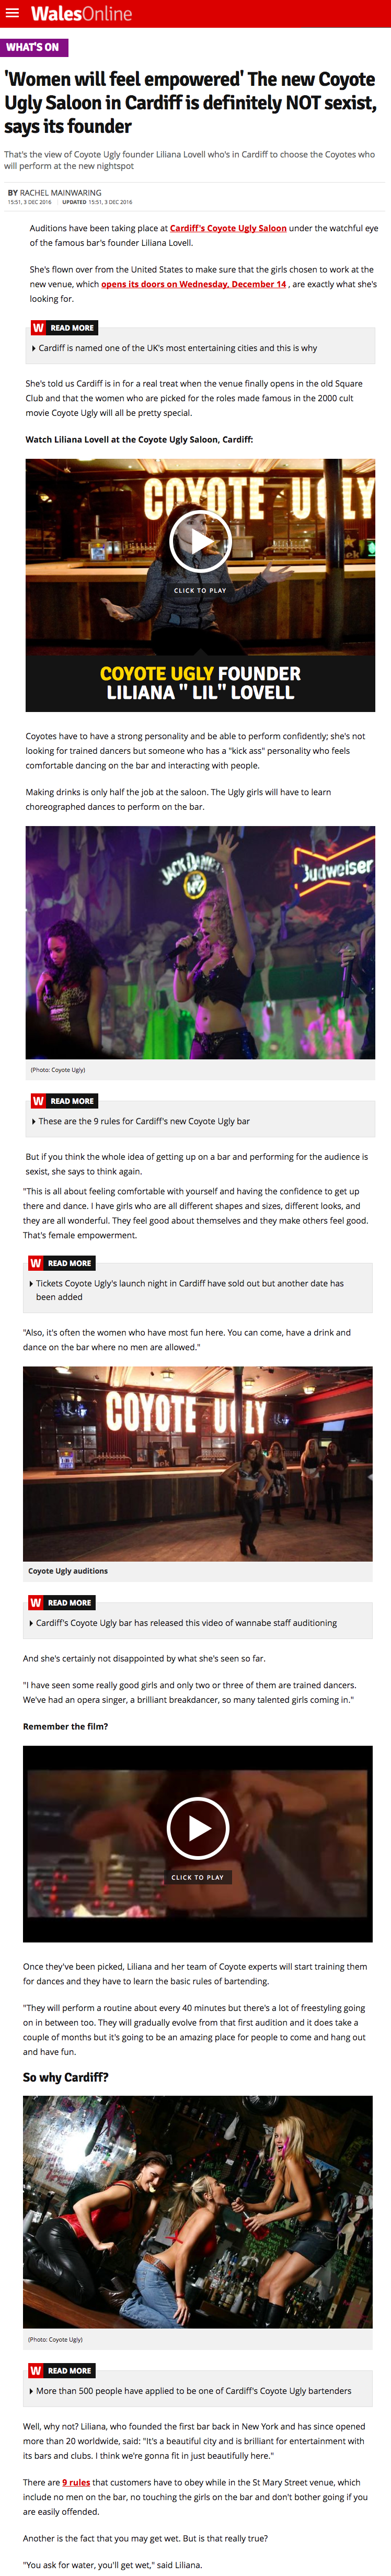 Women will feel empowered The new Coyote Ugly Saloon in Cardiff is definitely NOT sexist says its founder Wales Online